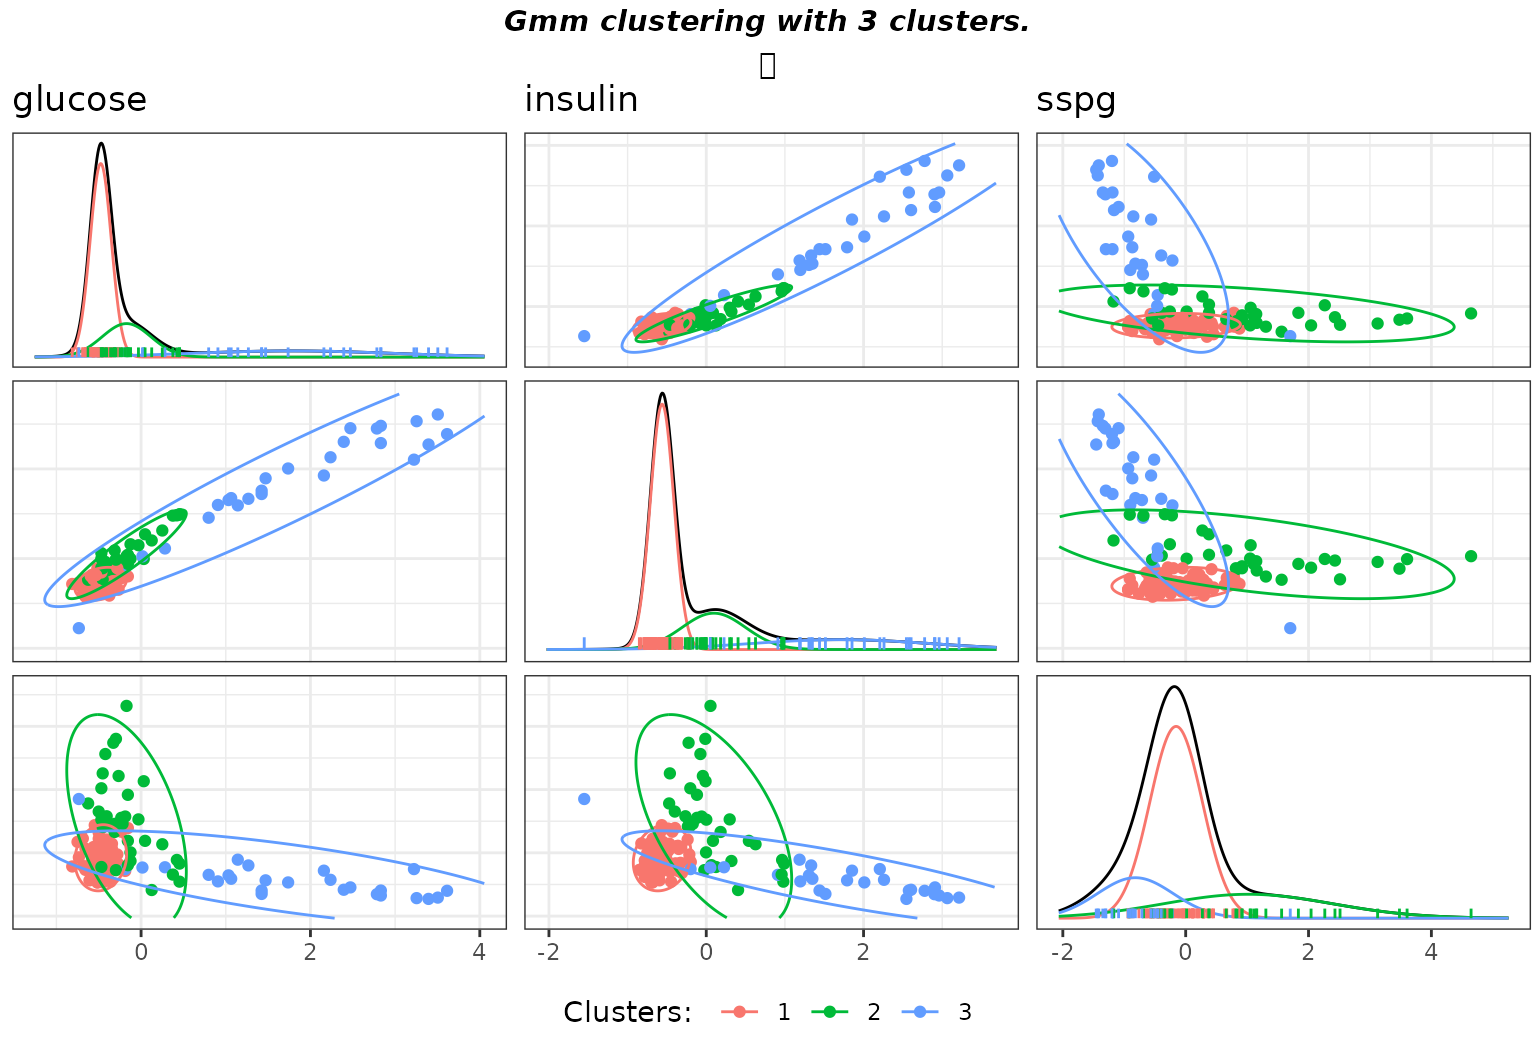 Matrix pairs plots of the clustering with user specified hyperparameters on the diabetes data.